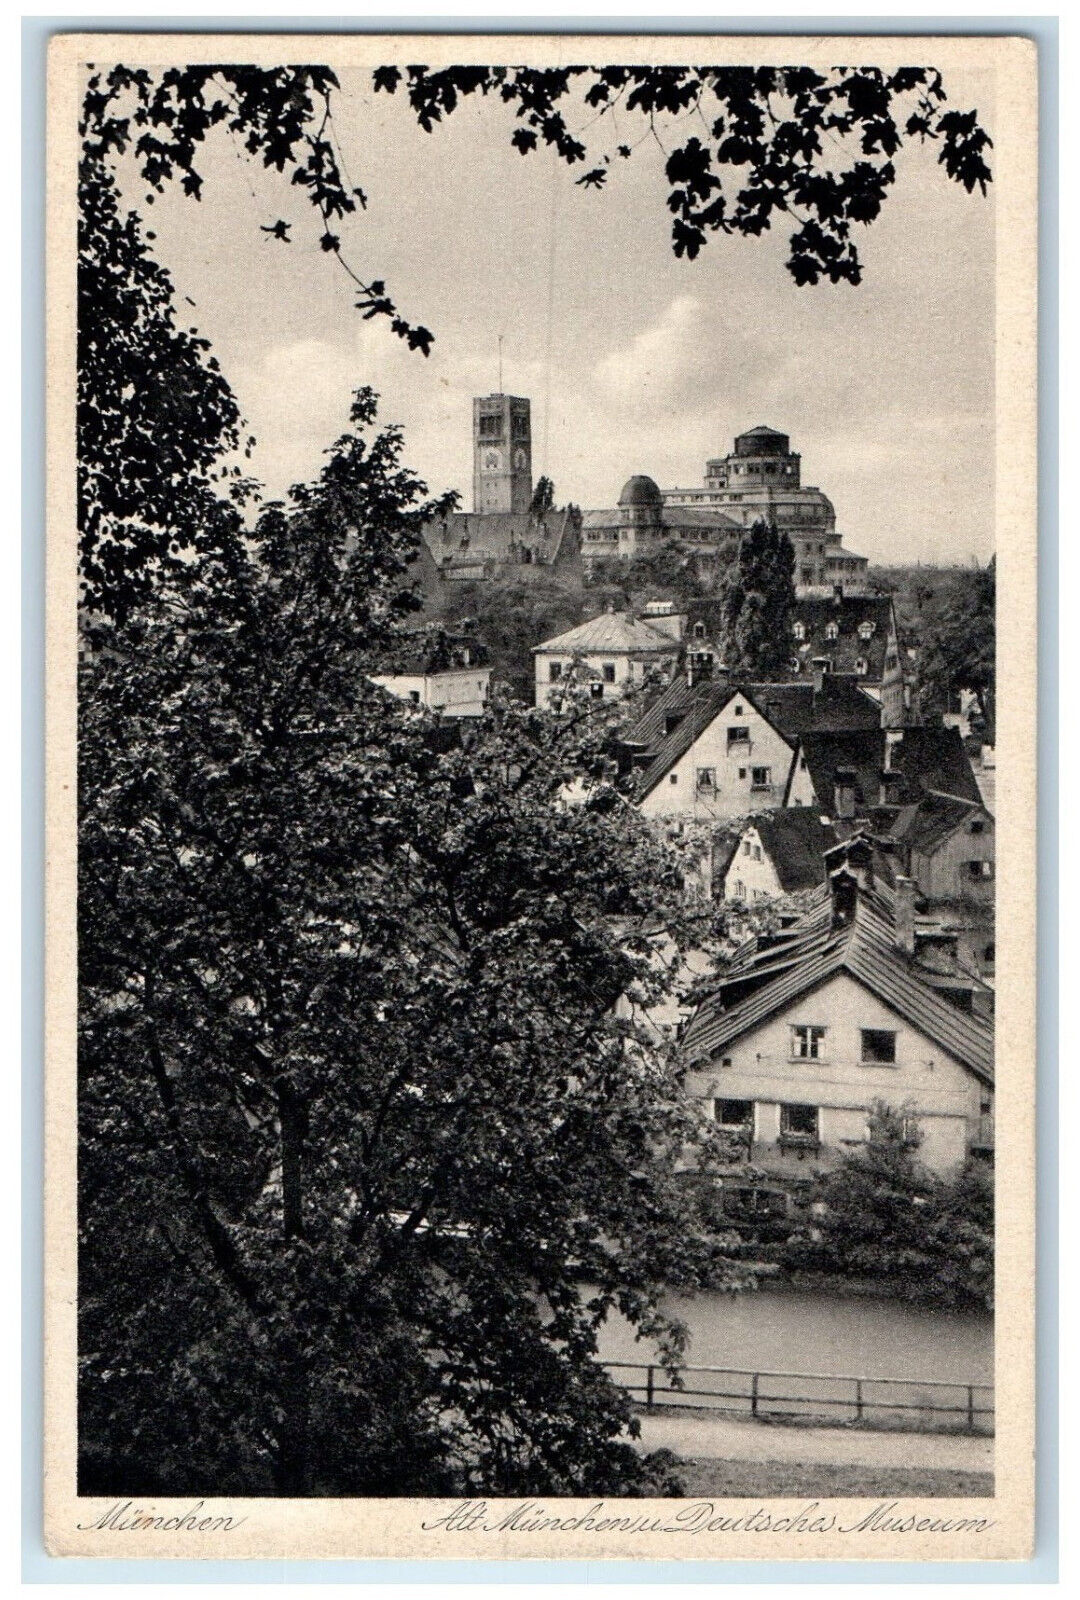 1934 Old Munich and German Museum Munich Germany Vintage Posted Postcard